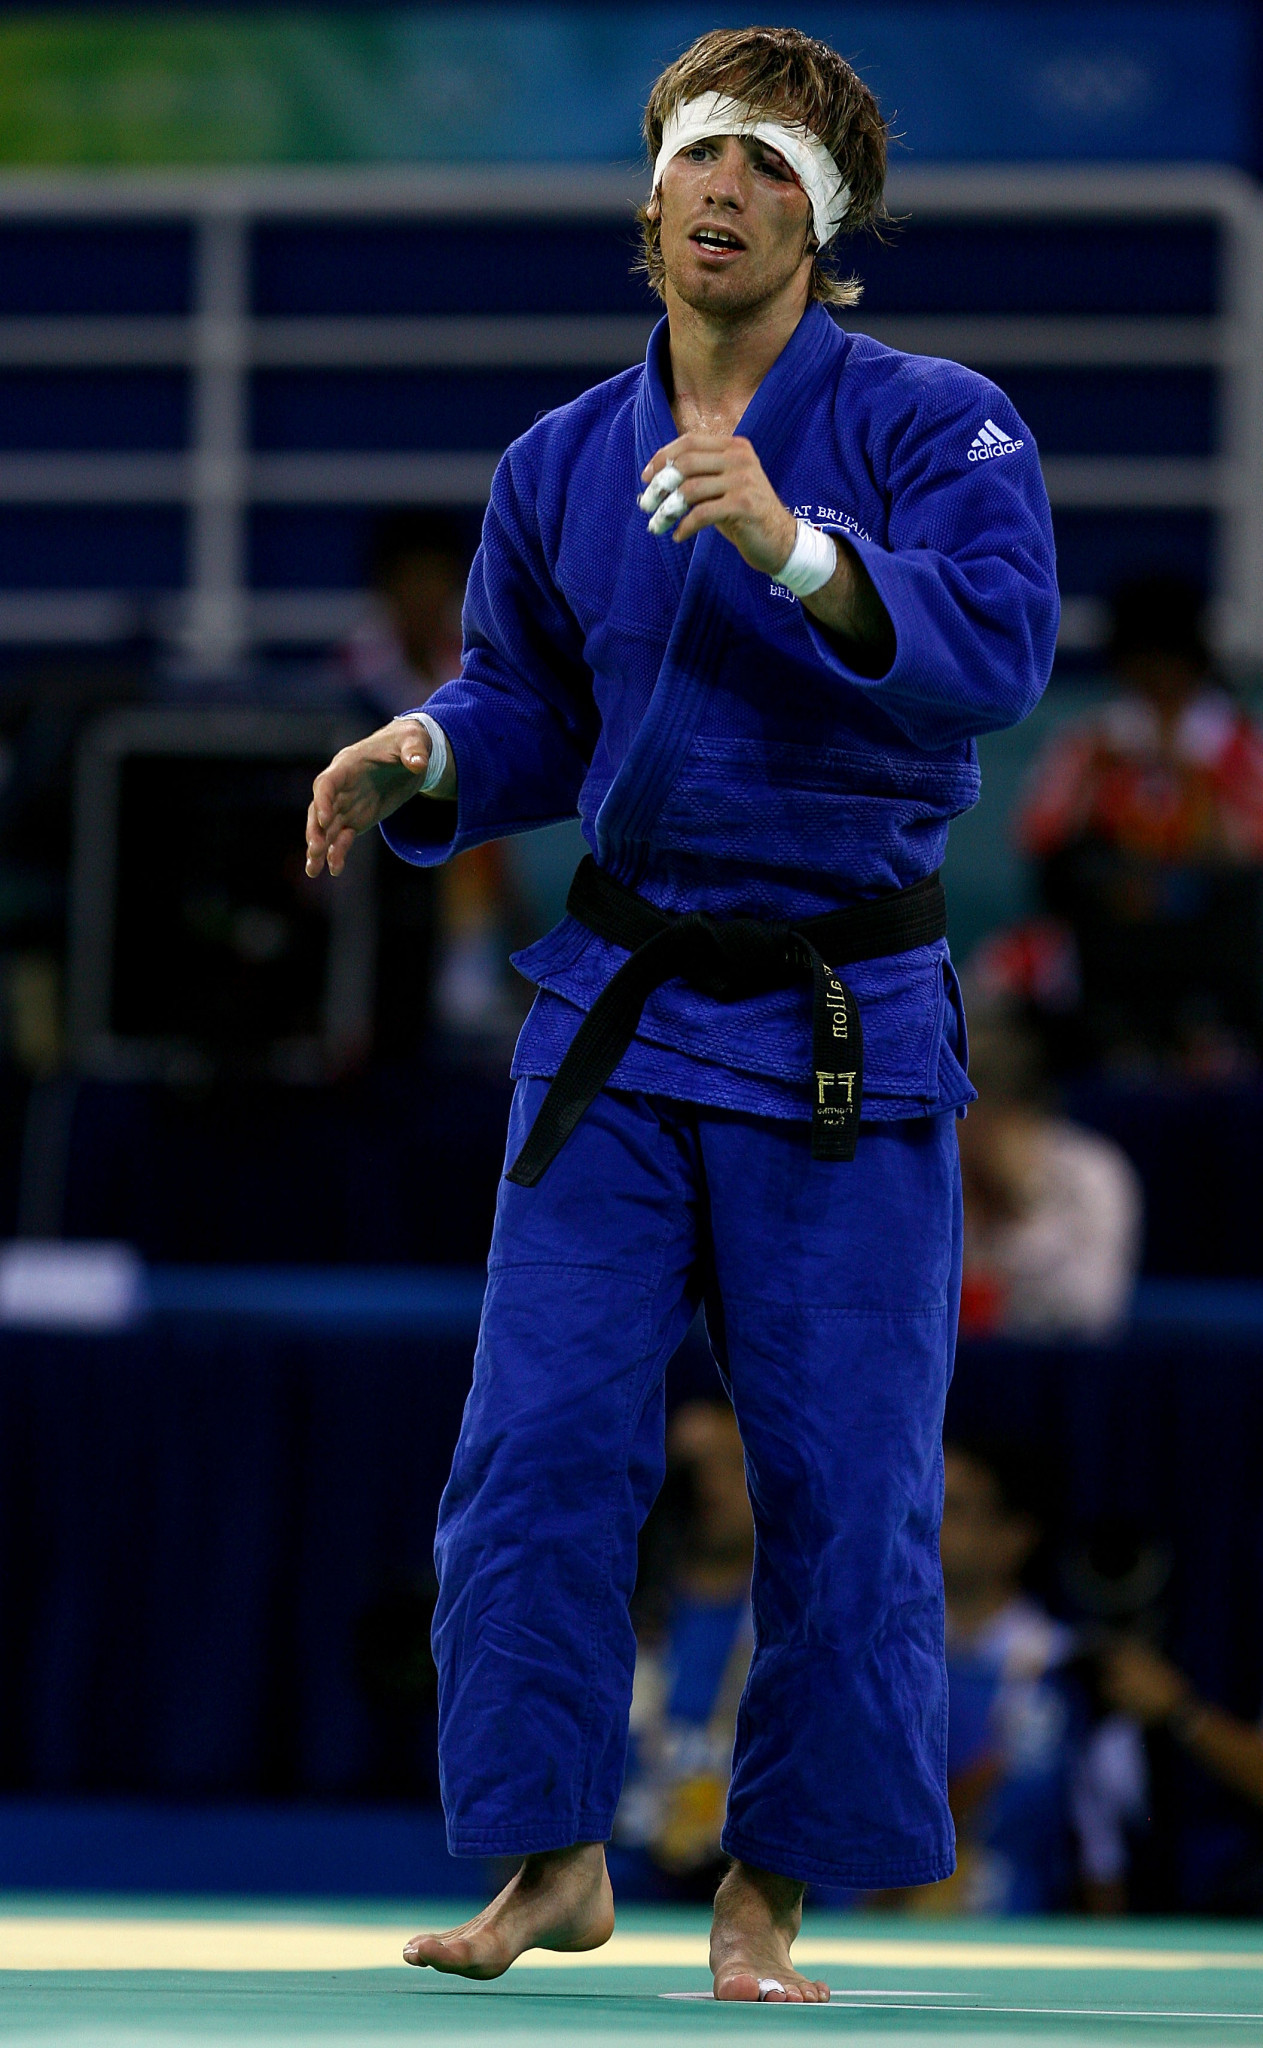 Craig Fallon won World Championship gold in 2005 ©Getty Images